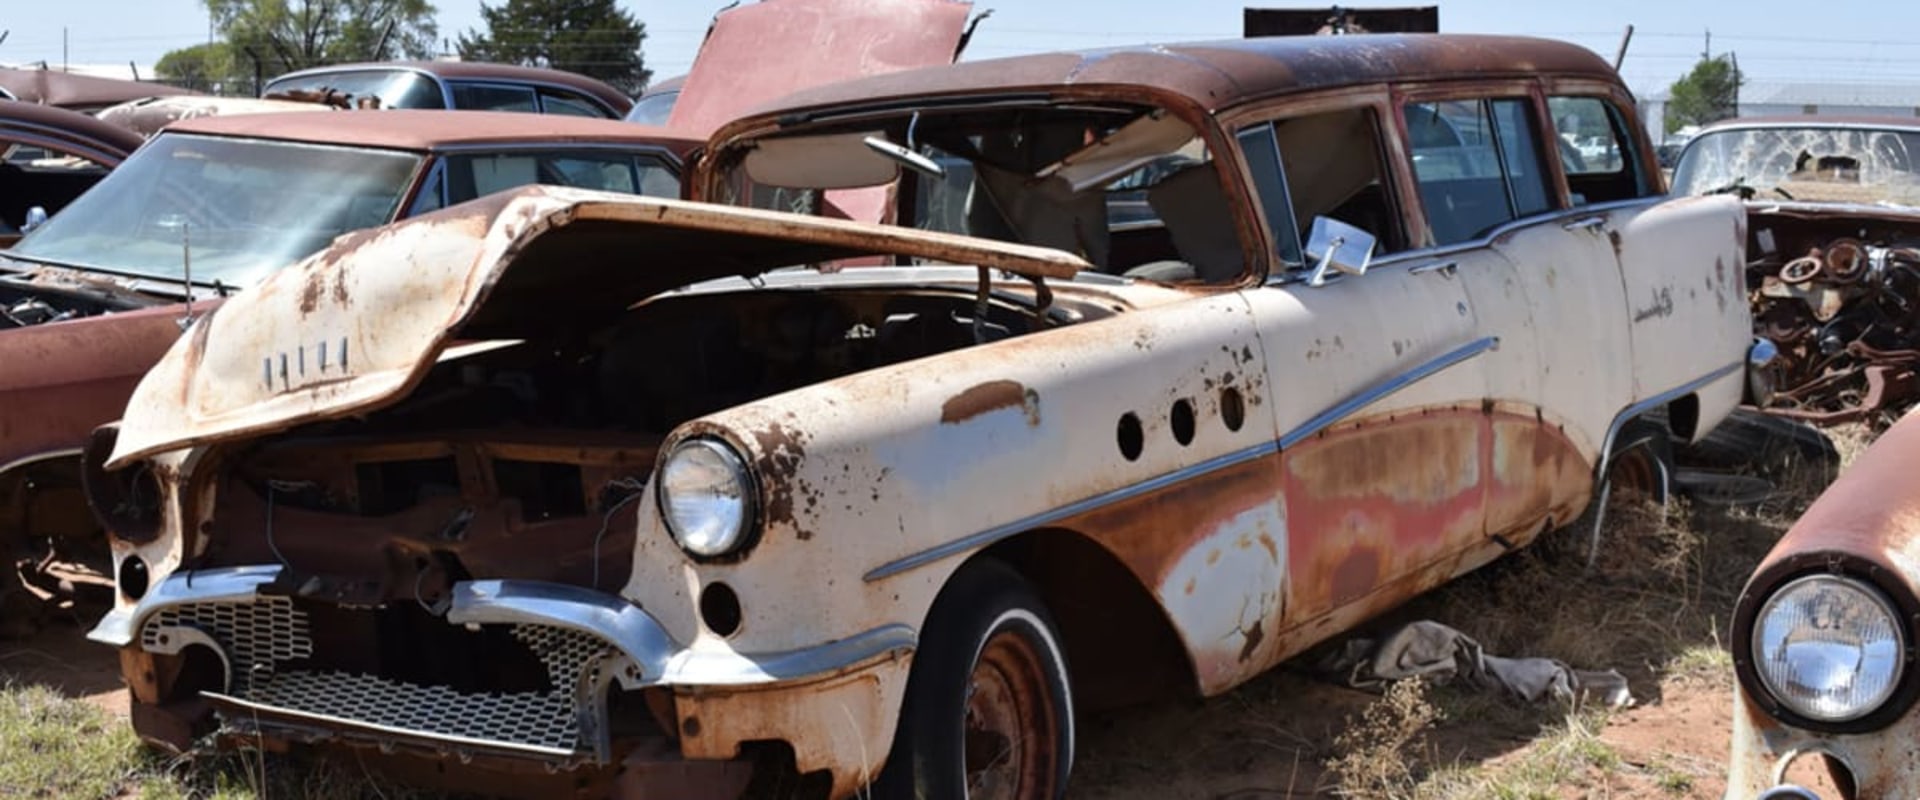 Finding Parts for a Vintage Car Restoration Project in Central Texas: A Comprehensive Guide